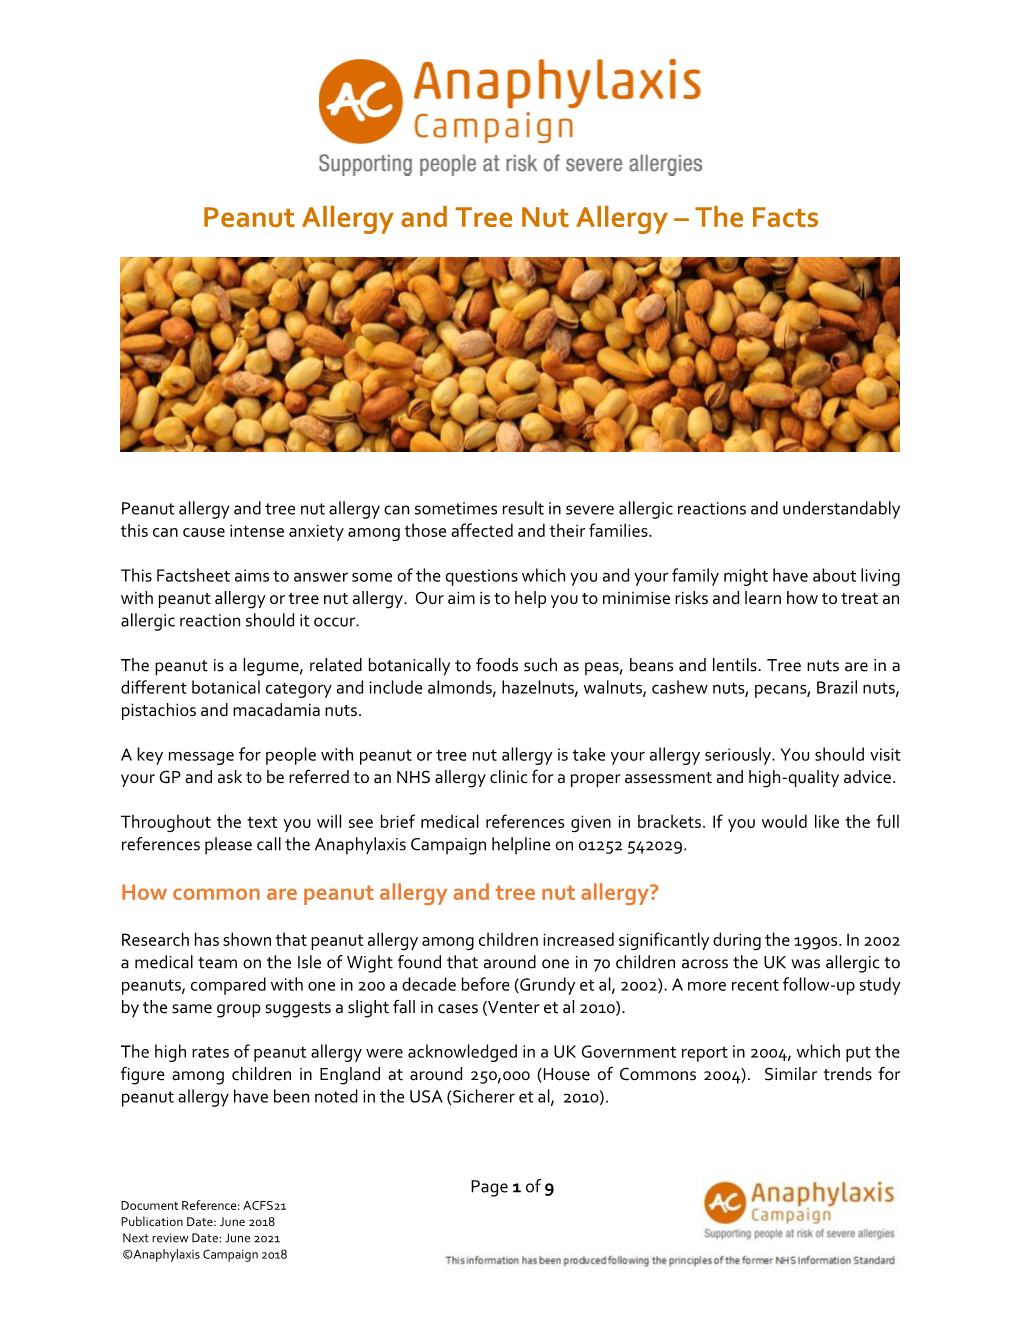 Allergy to Peanuts and Tree Nuts – the Facts